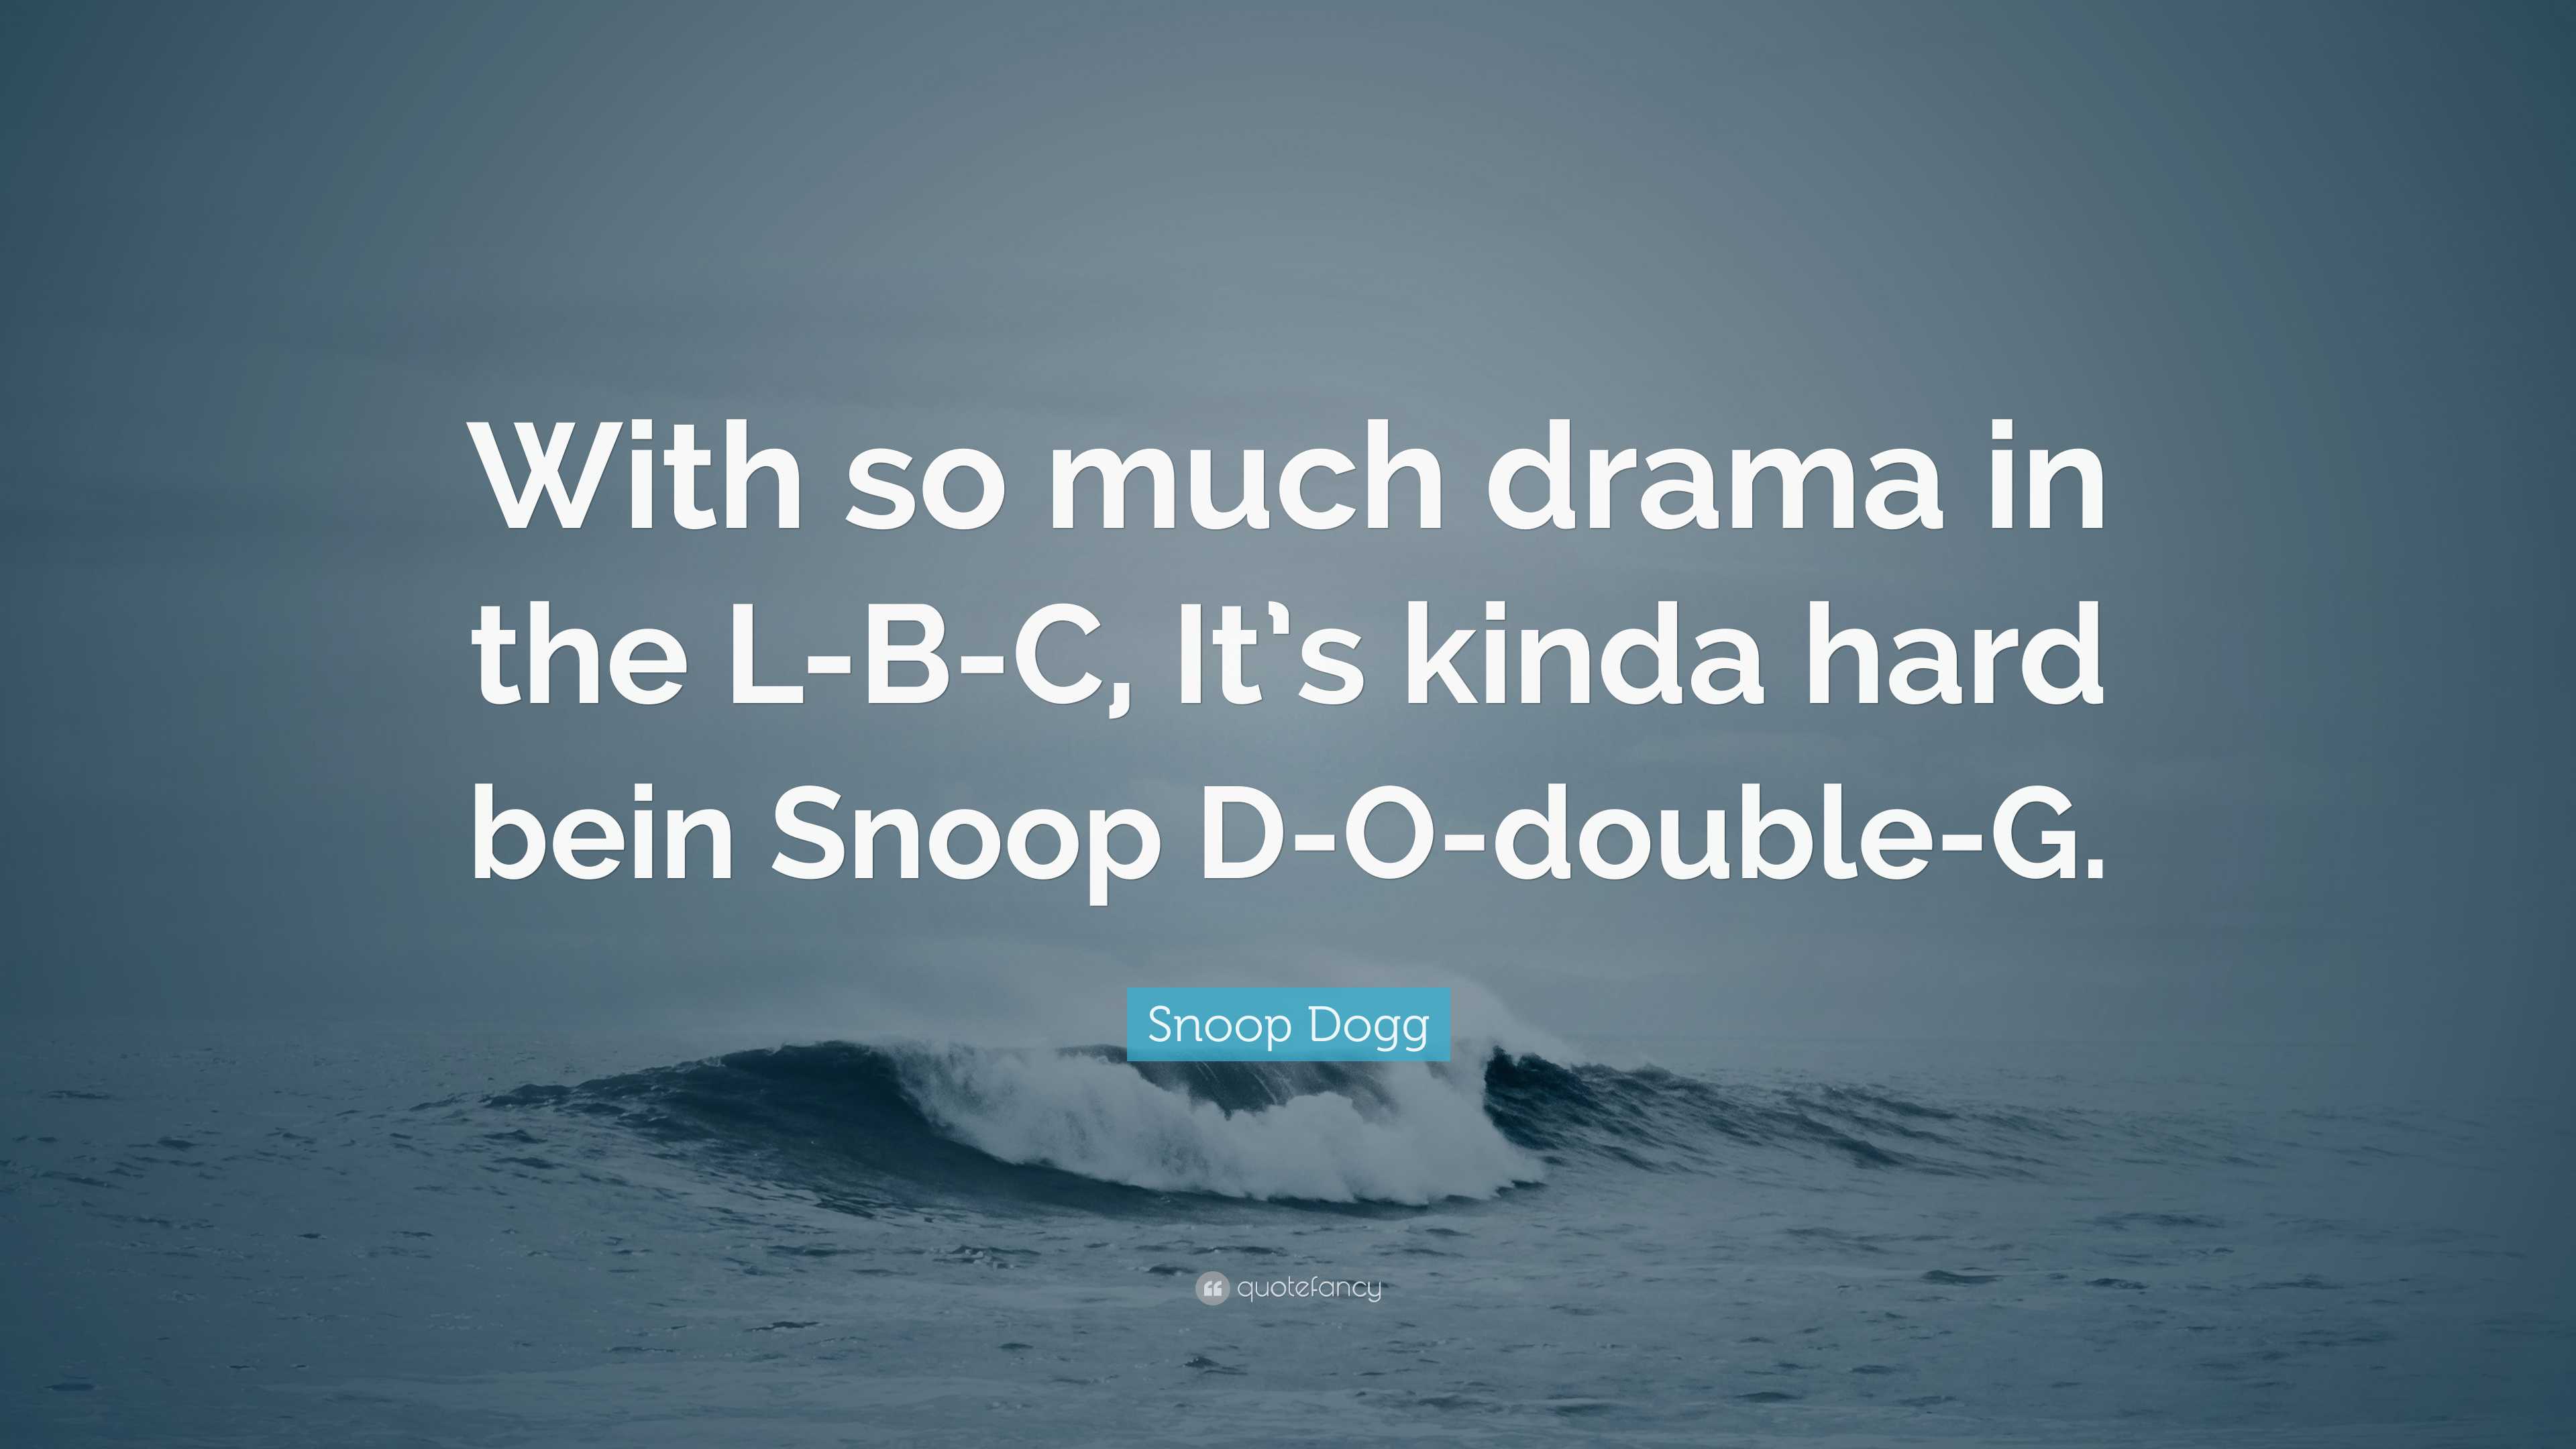 Snoop Dogg quote: With so much drama in the L-B-C, It's kinda hard